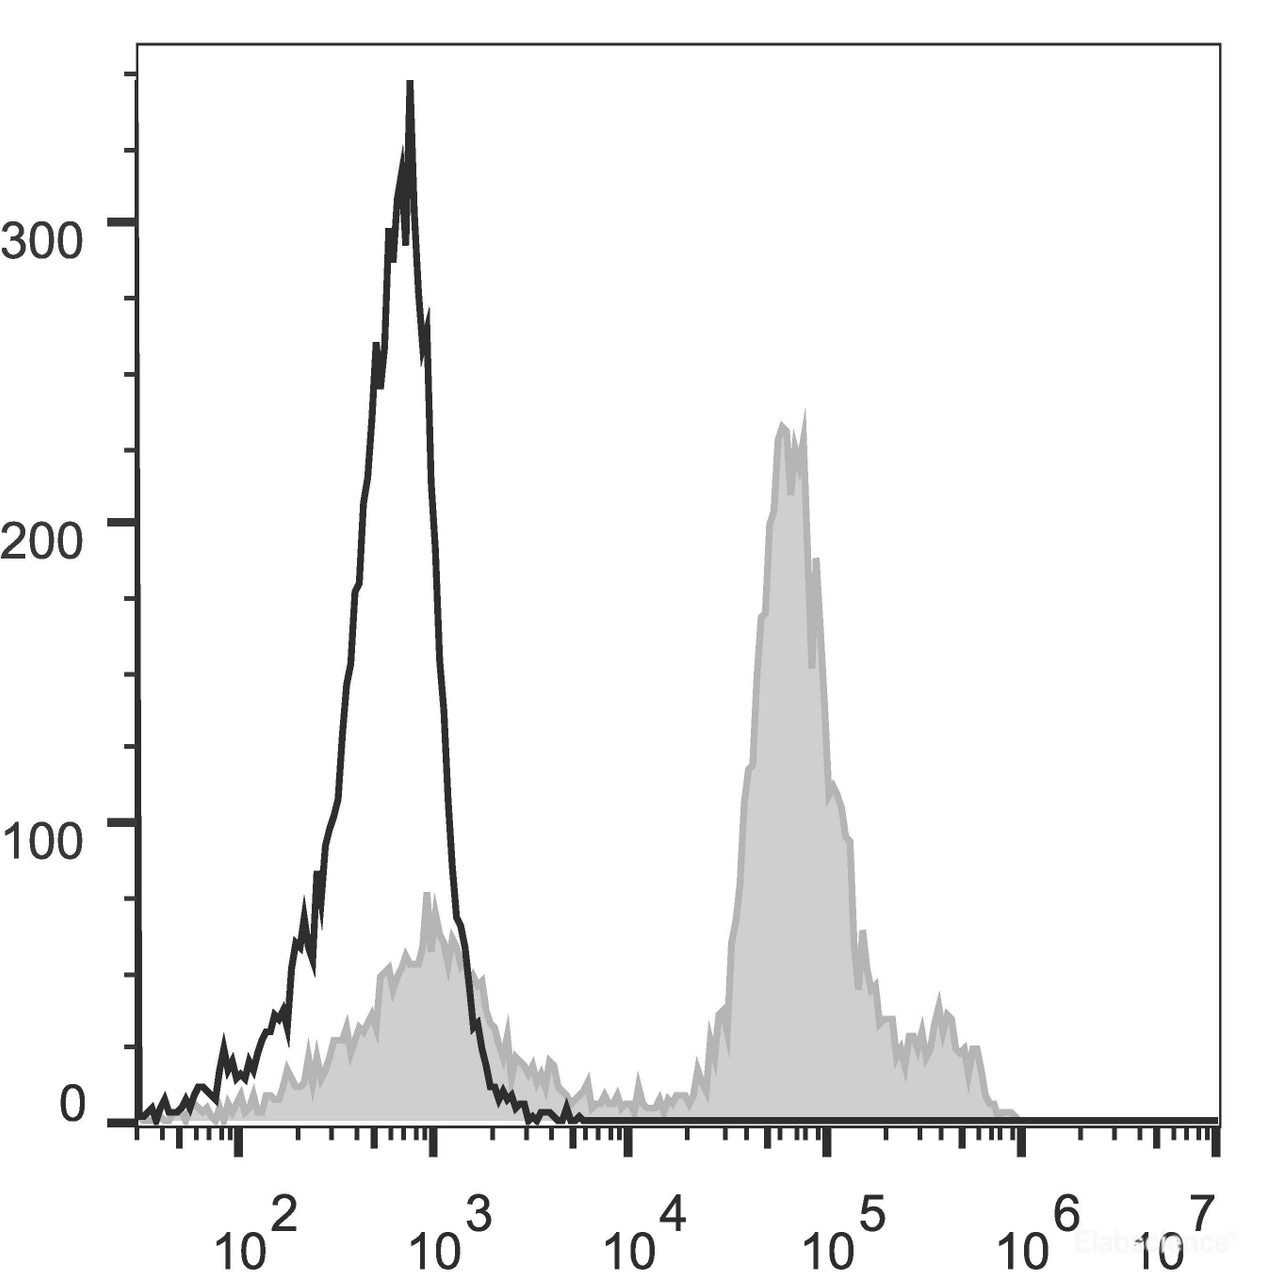 C57BL/6 murine bone marrow cells are stained with PE Anti-Mouse Ly6C Antibody[Used at .2 μg/1<sup>6</sup> cells dilution](filled gray histogram). Unstained bone marrow cells (empty black histogram) are used as control.